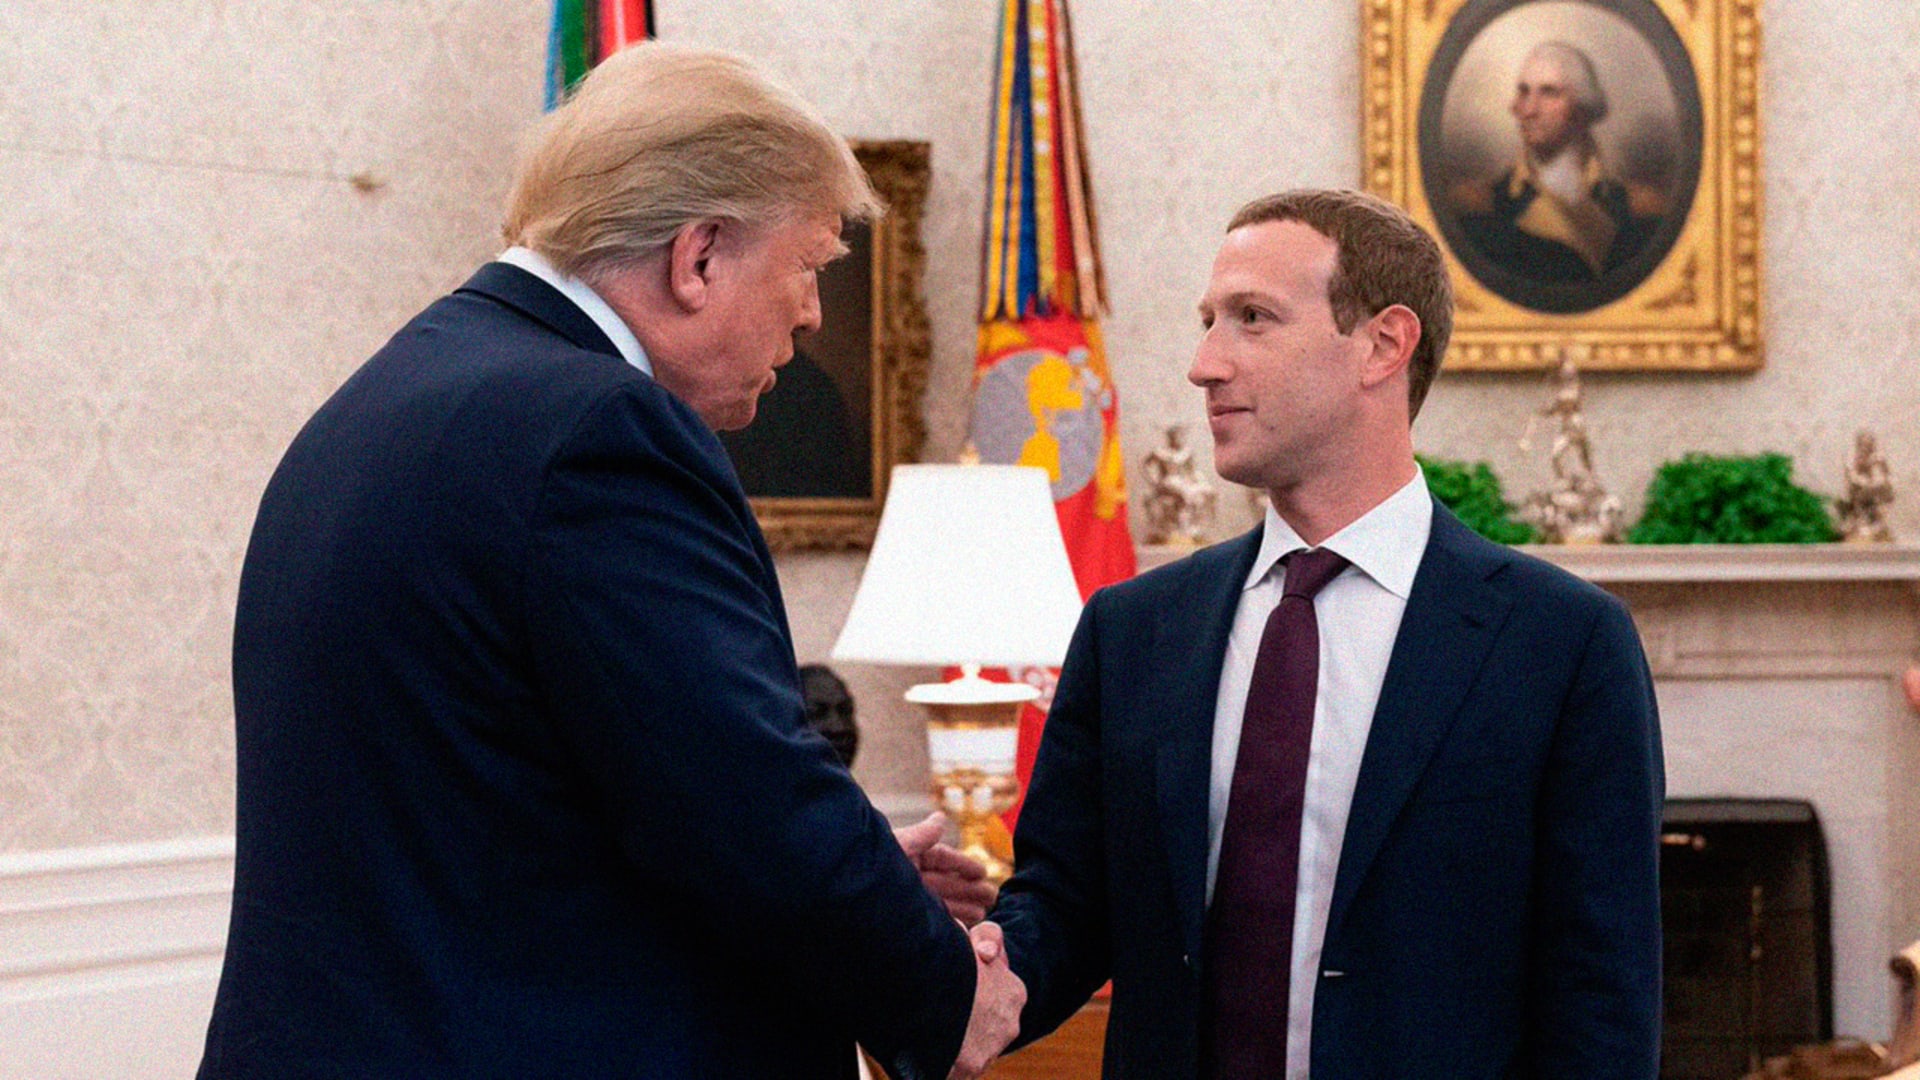 Trump met with Mark Zuckerberg at the White House and posted about it . . . on Twitter